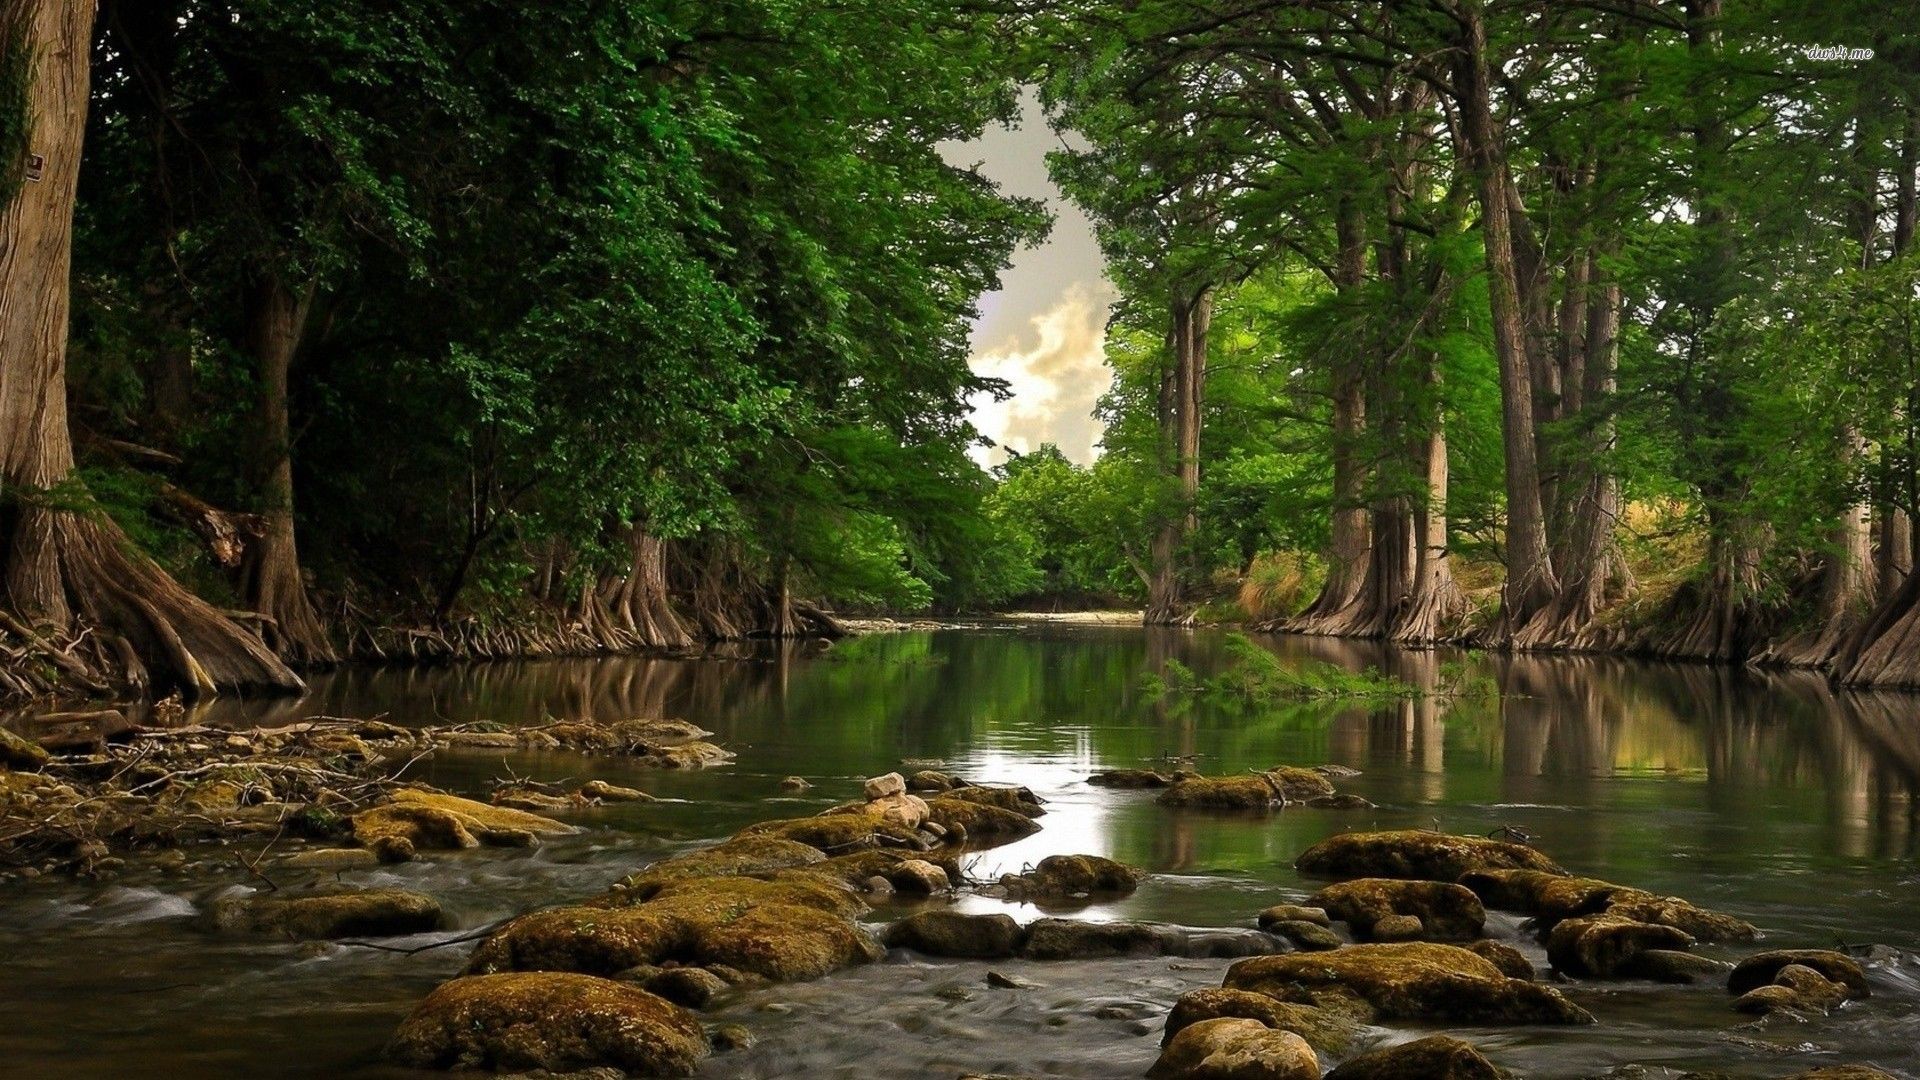 Forest River Wallpaper Photo Uco Landscape Nature Tree